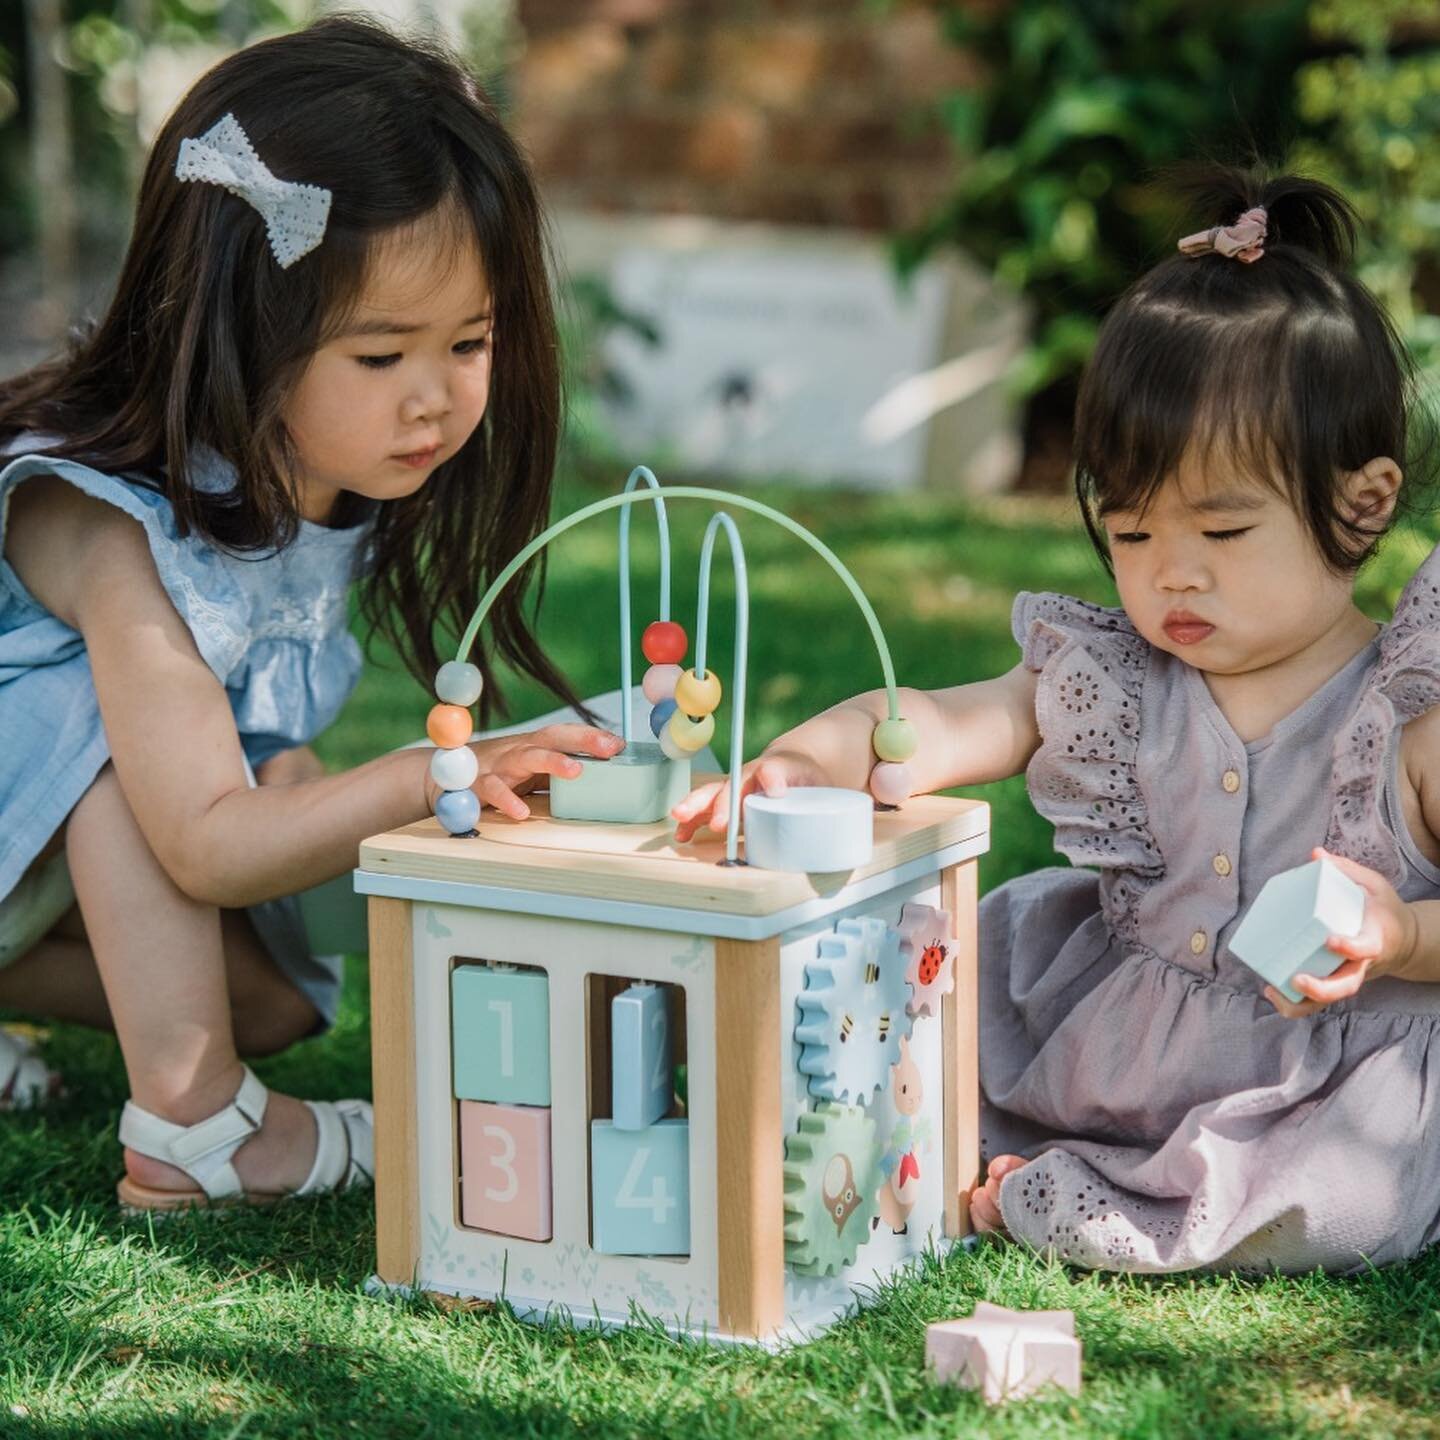 ** MODEL CALL! **
** Photoshoot 14th Sept (Wednesday morning) **
** Near Tewkesbury **

Calling any 1-4 year olds who would like to play with wooden toys, whilst being photographed by me!
Must be able to get to Kemerton (near Tewkesbury) on Wednesday